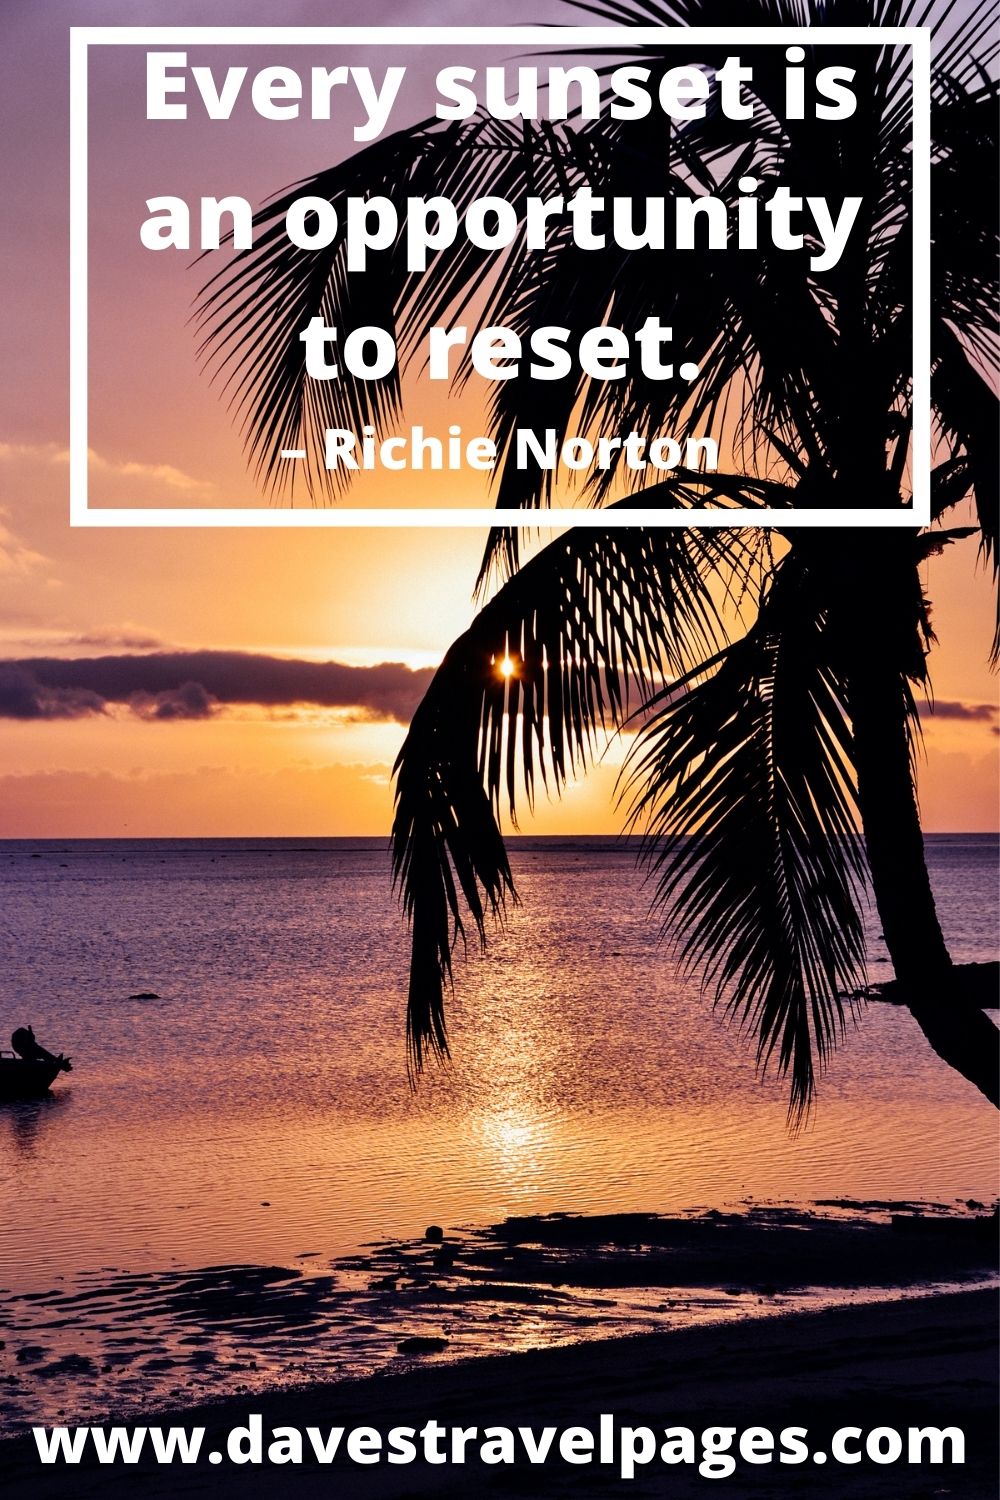 Every sunset is an opportunity to reset. – Richie Norton